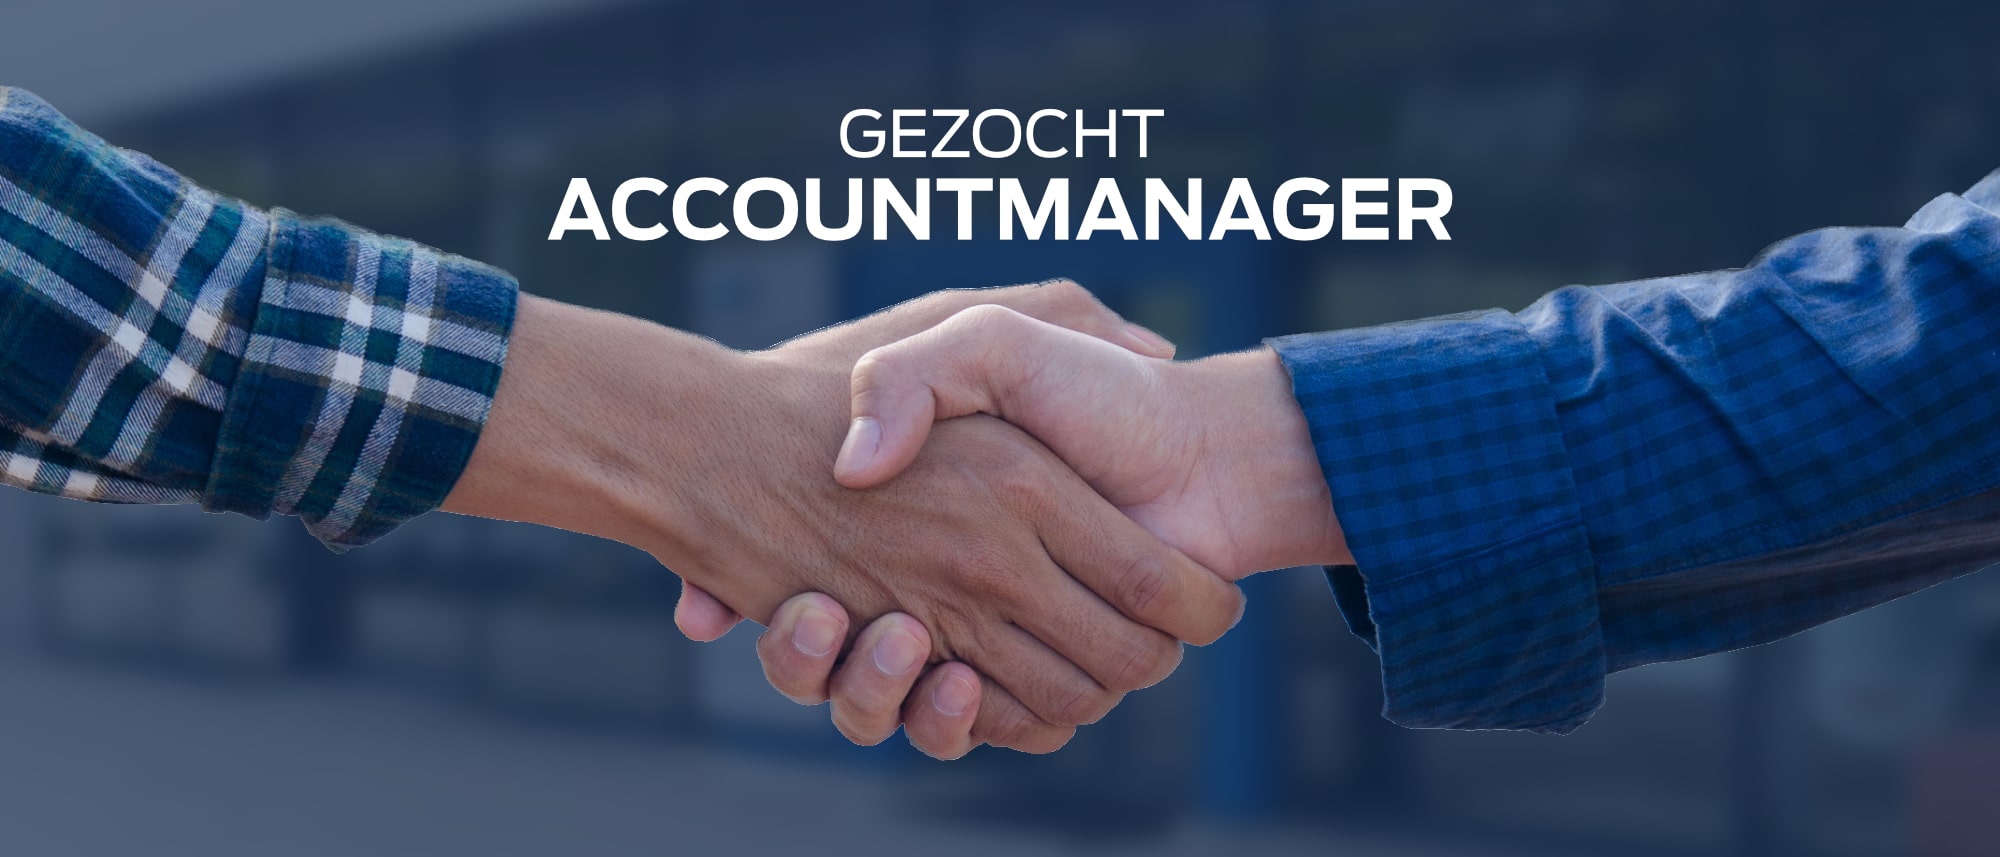 Ford van Leussen vacature Account manager in omgeving Zwolle